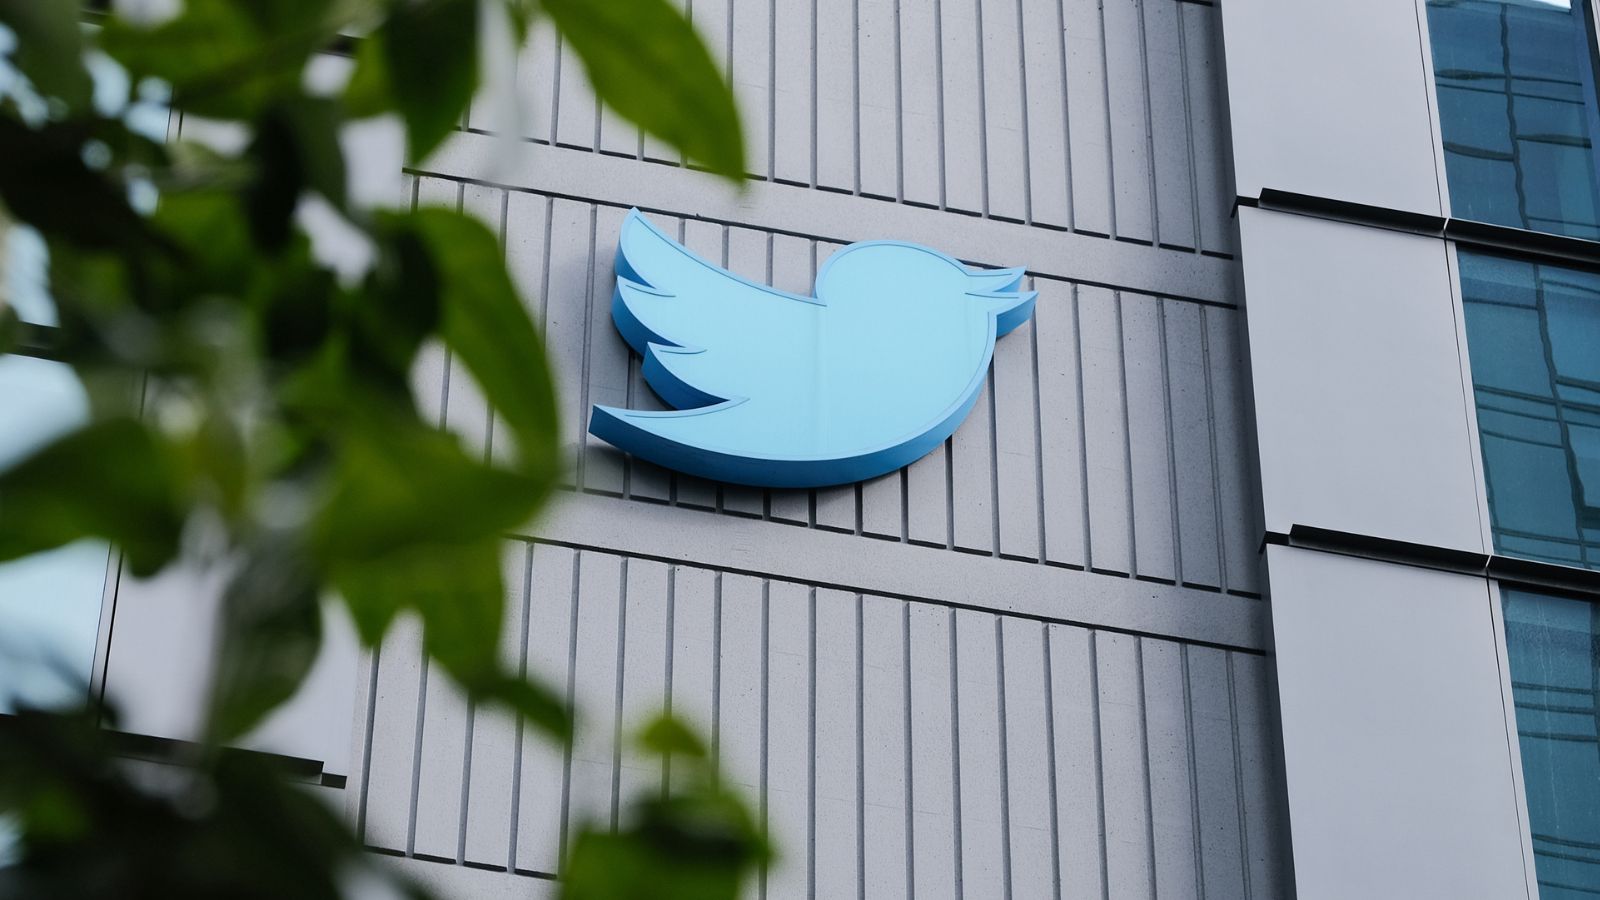 It’s been just over 48 hours since Twitter’s mass layoffs, and now fired workers are already being begged to return